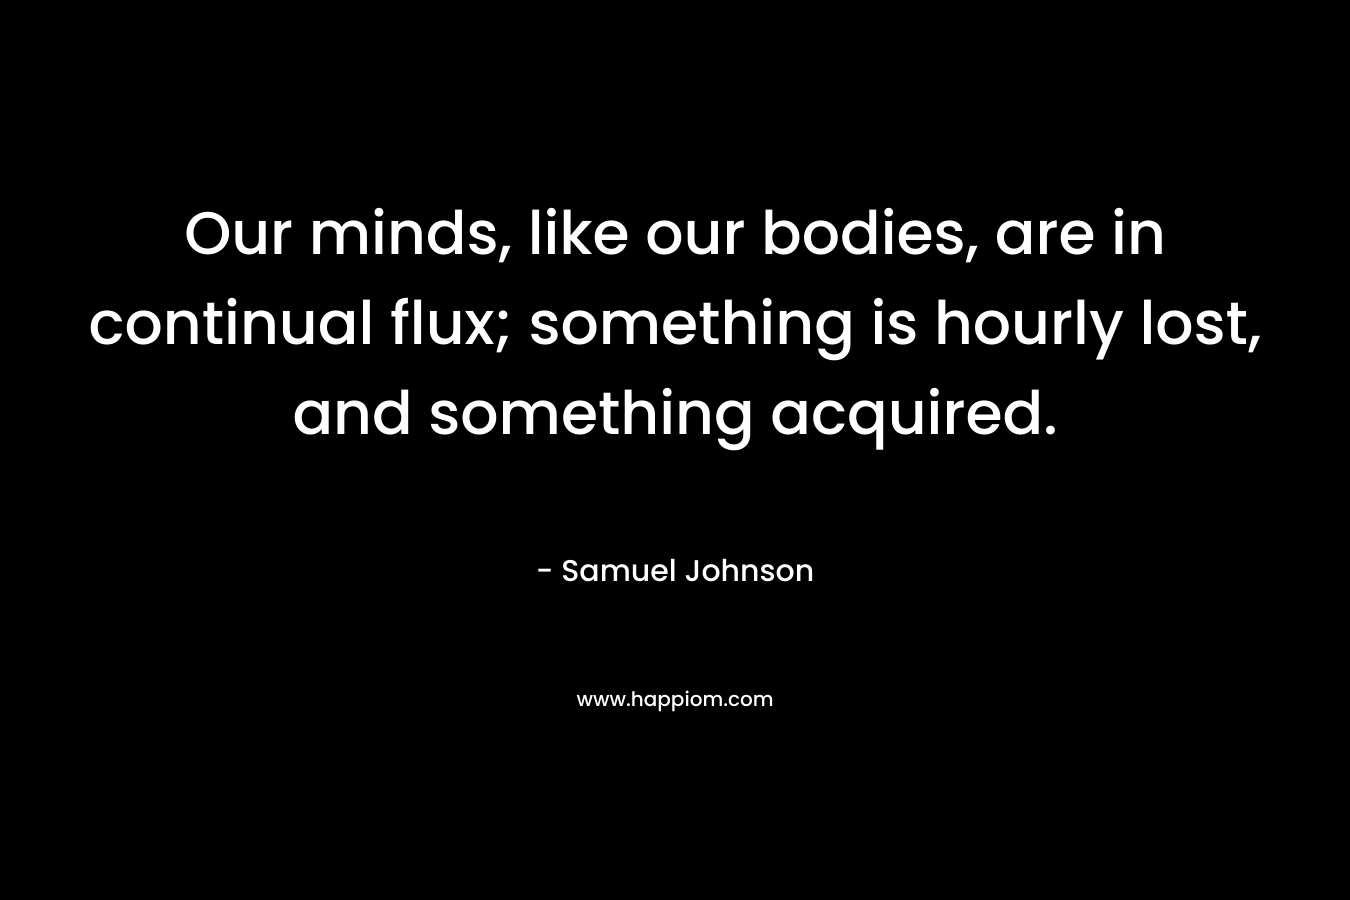 Our minds, like our bodies, are in continual flux; something is hourly lost, and something acquired.